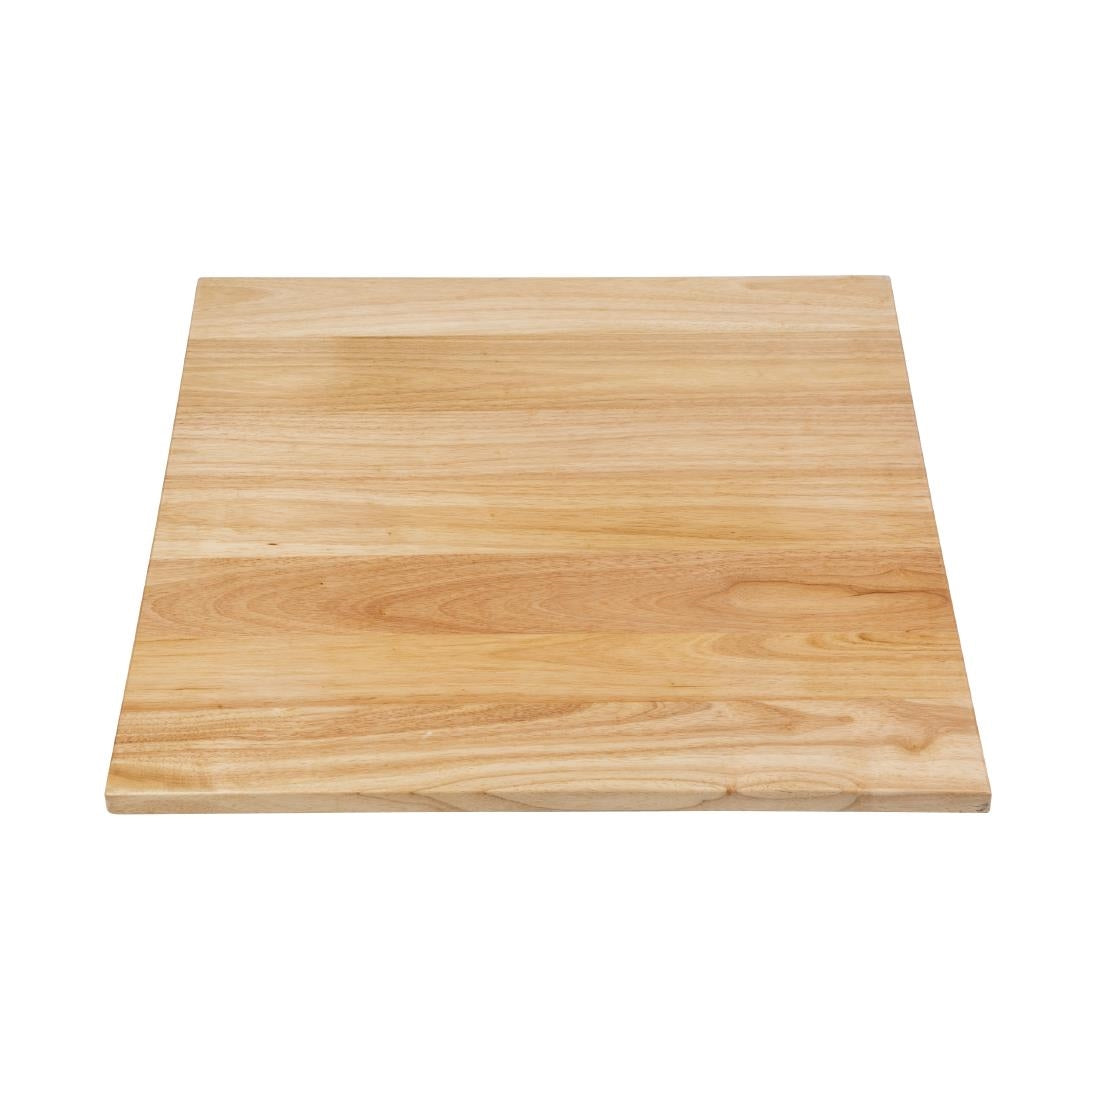 Bolero Pre-drilled Square Table Top Natural 700mm JD Catering Equipment Solutions Ltd